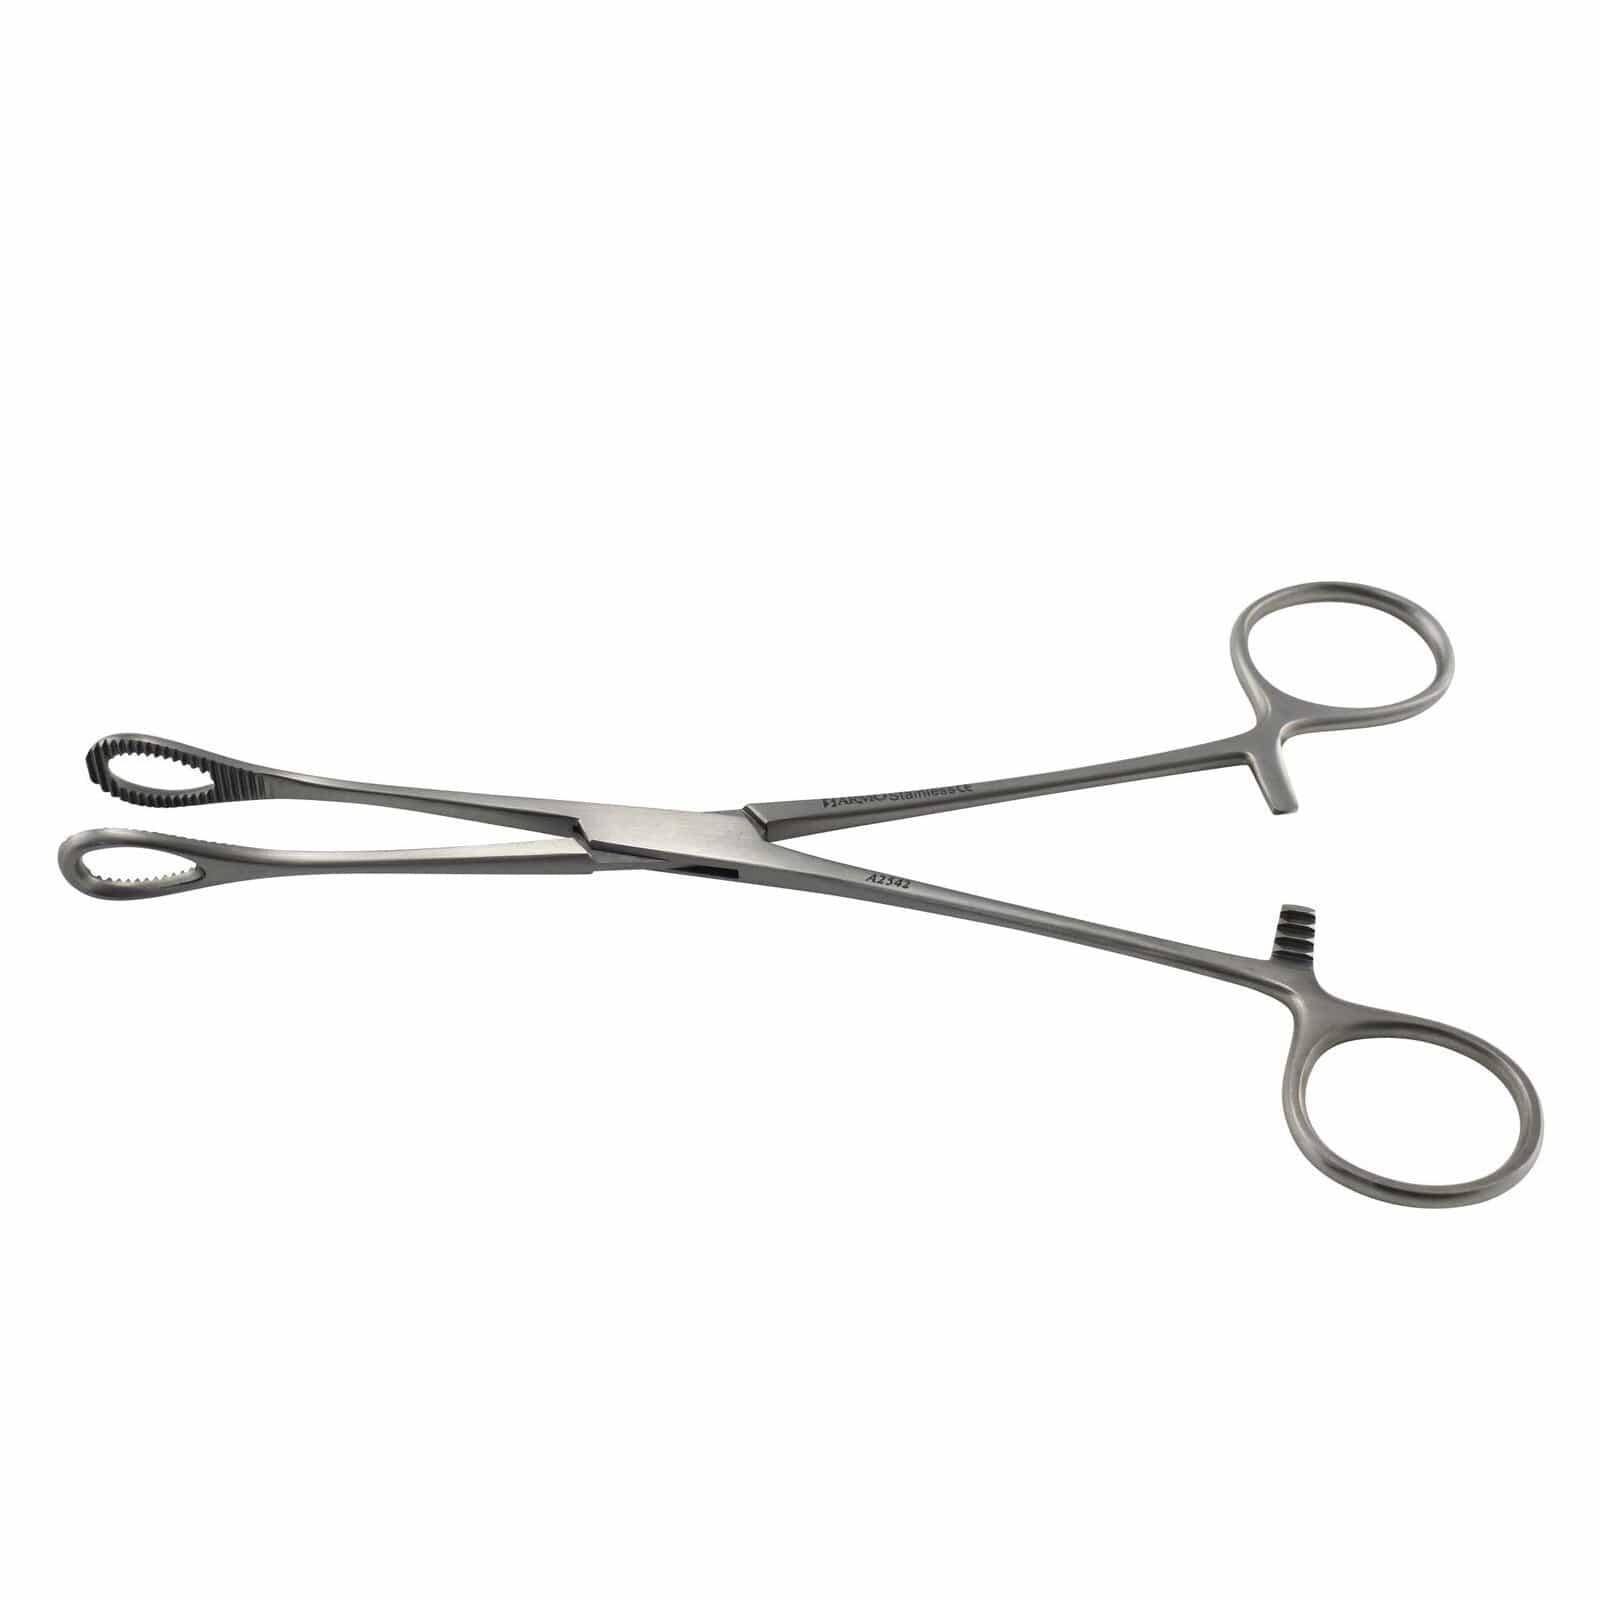 Armo Surgical Instruments 20cm Armo Foerster Forceps